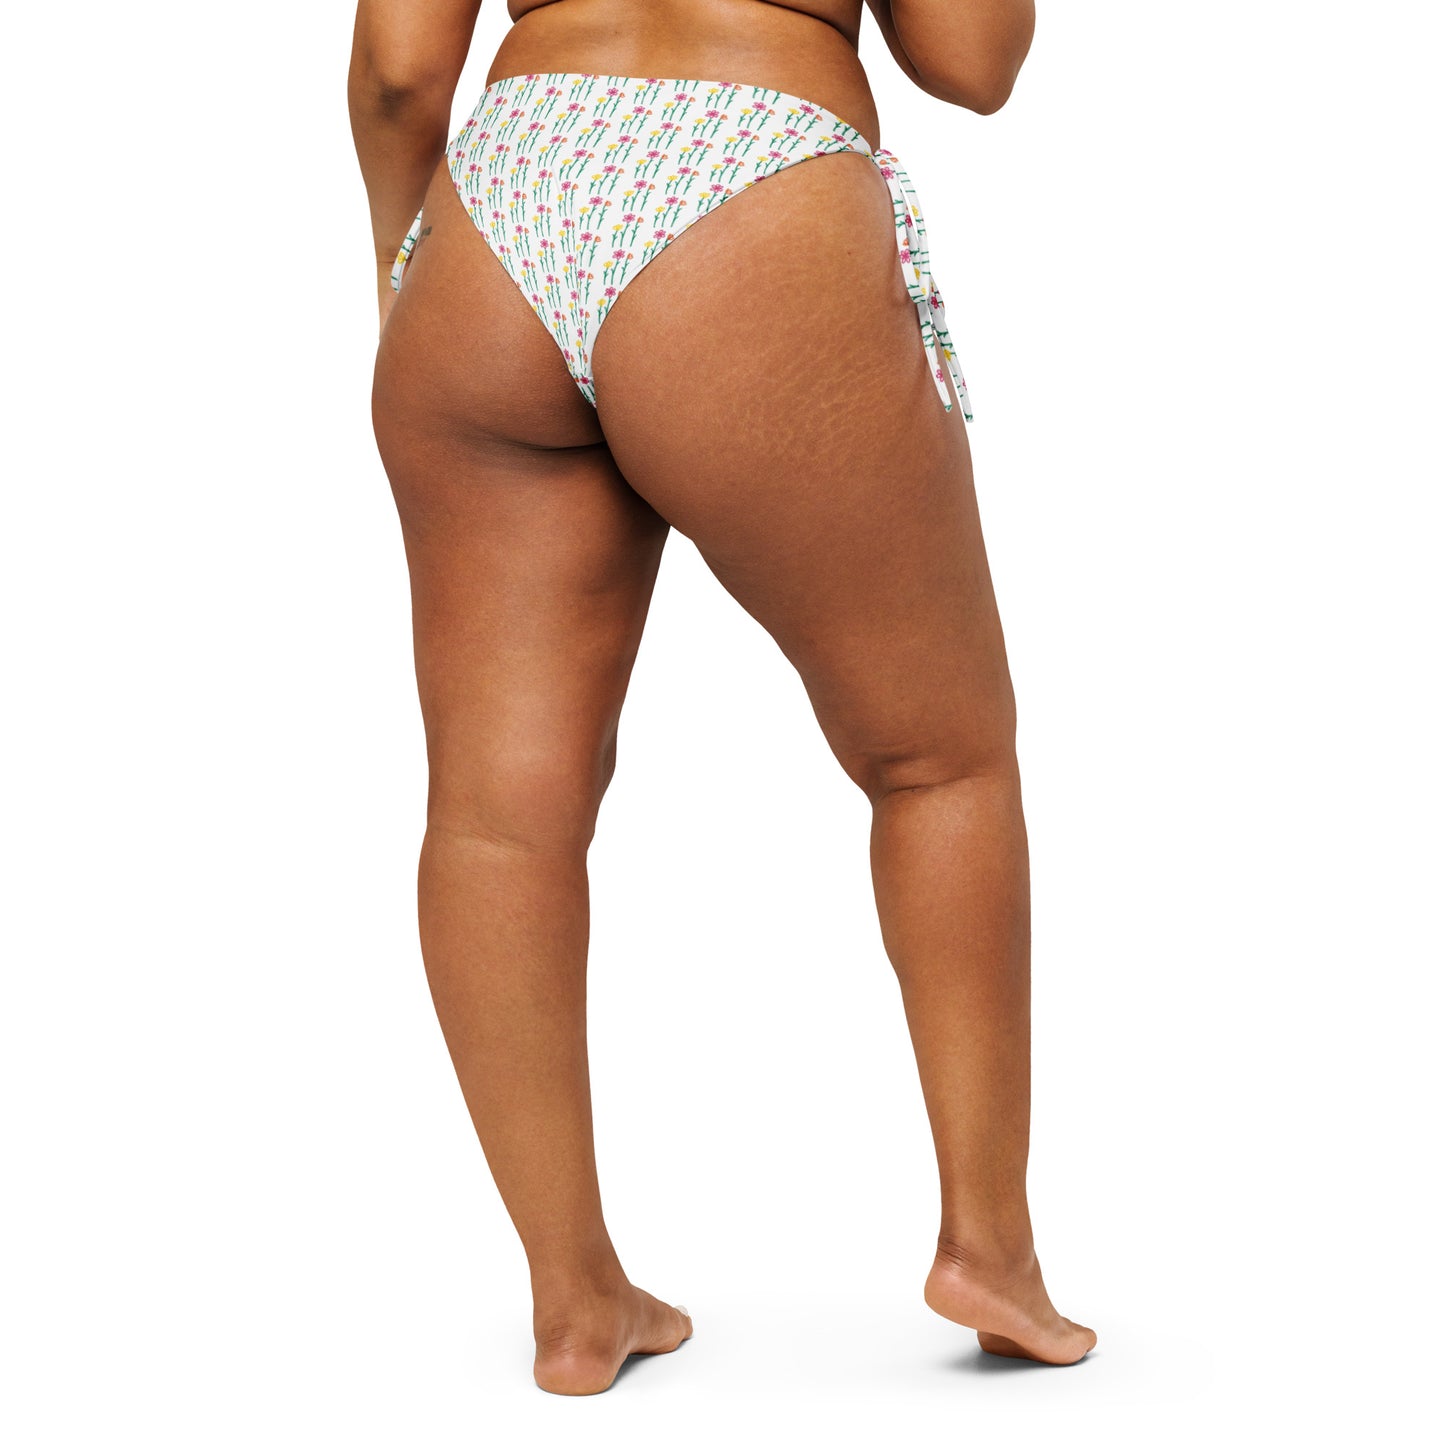 be yourself - all-over print recycled string bikini bottoms by the banannie diaries